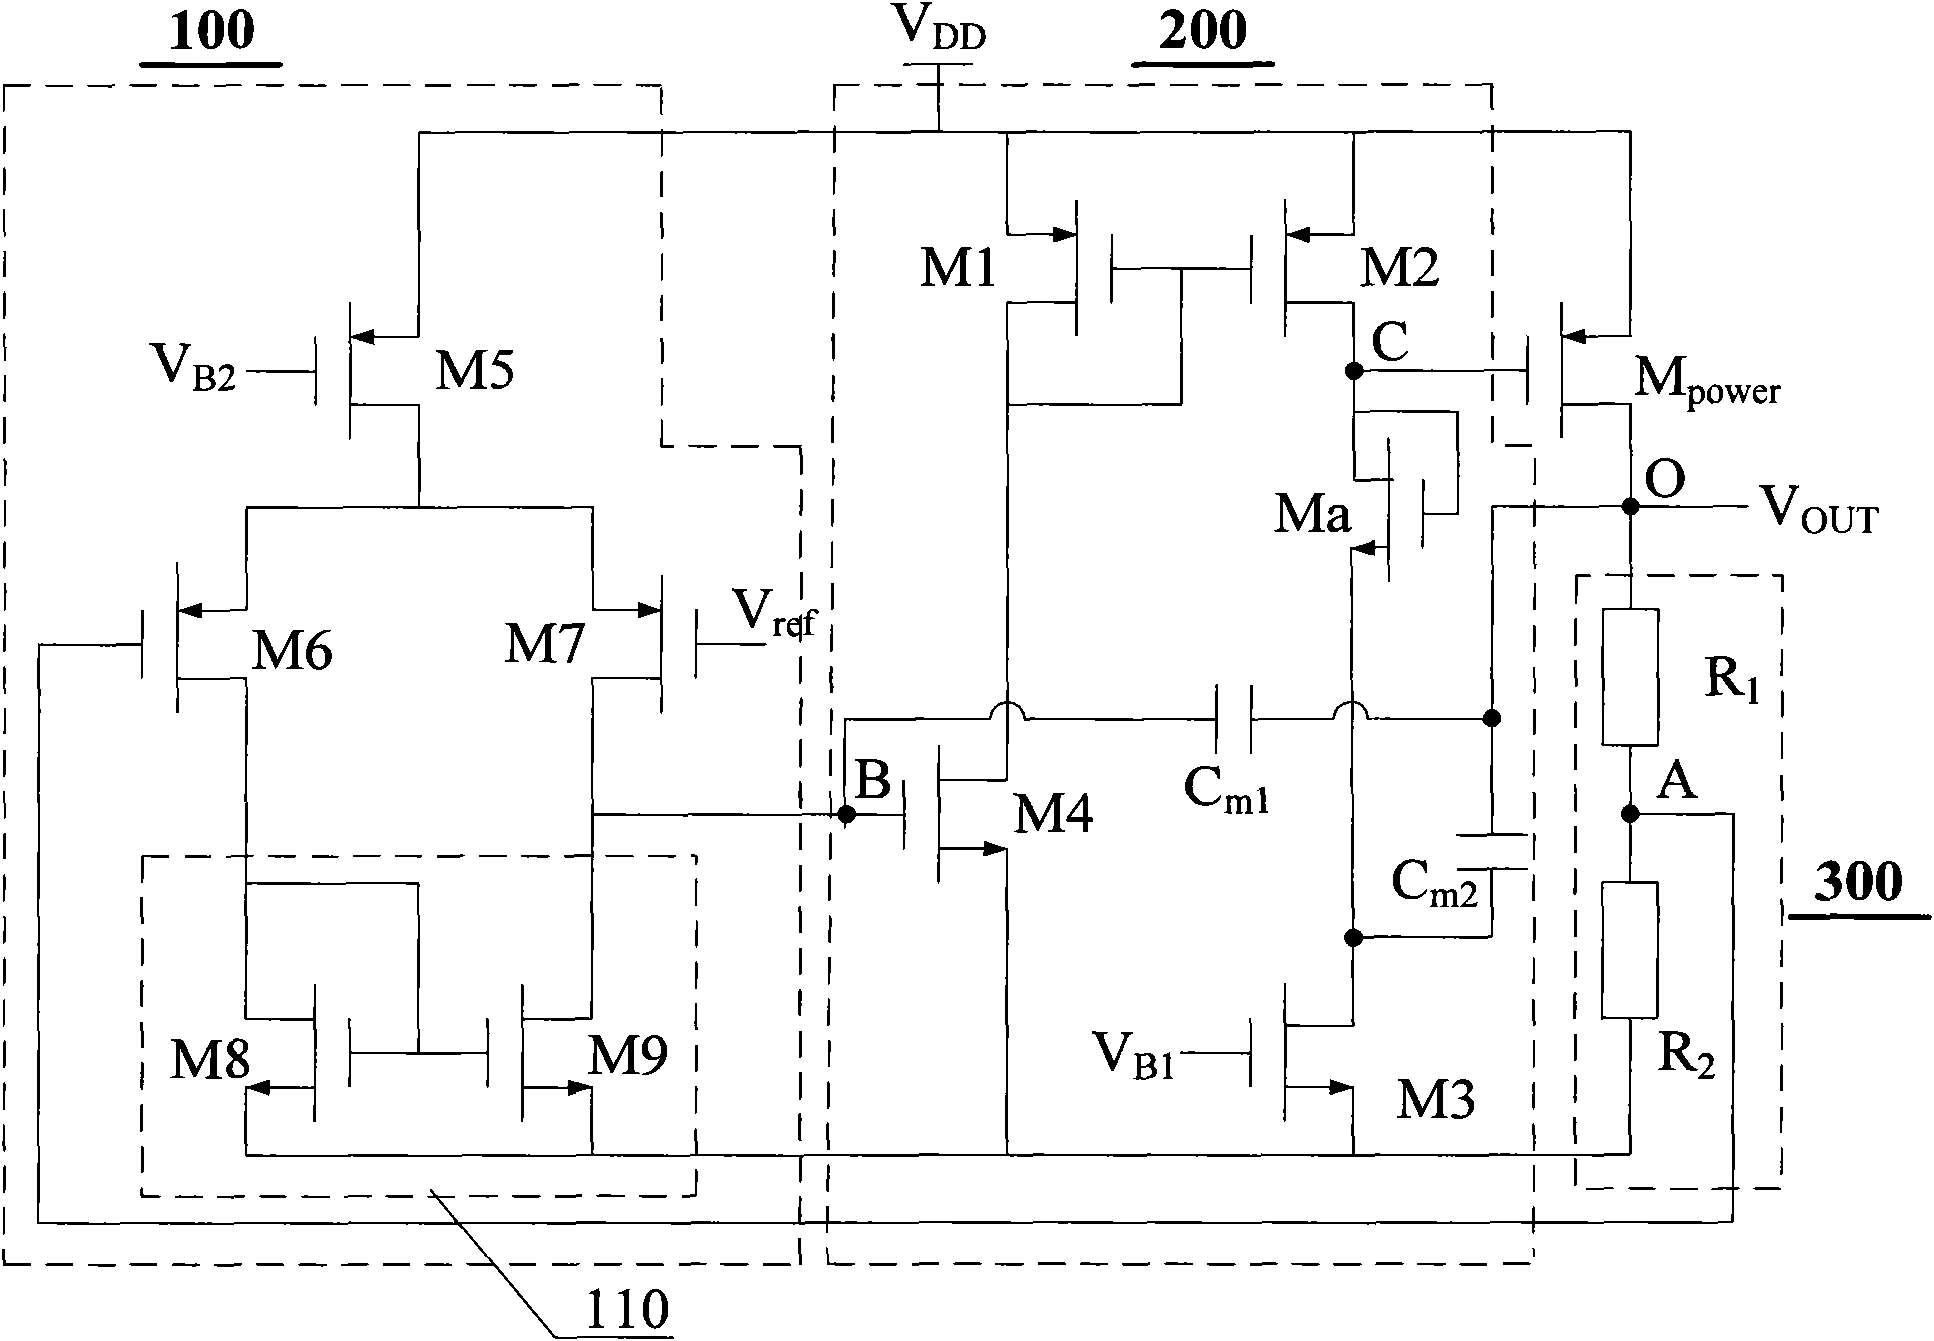 Capacitor-less low dropout regulator structure